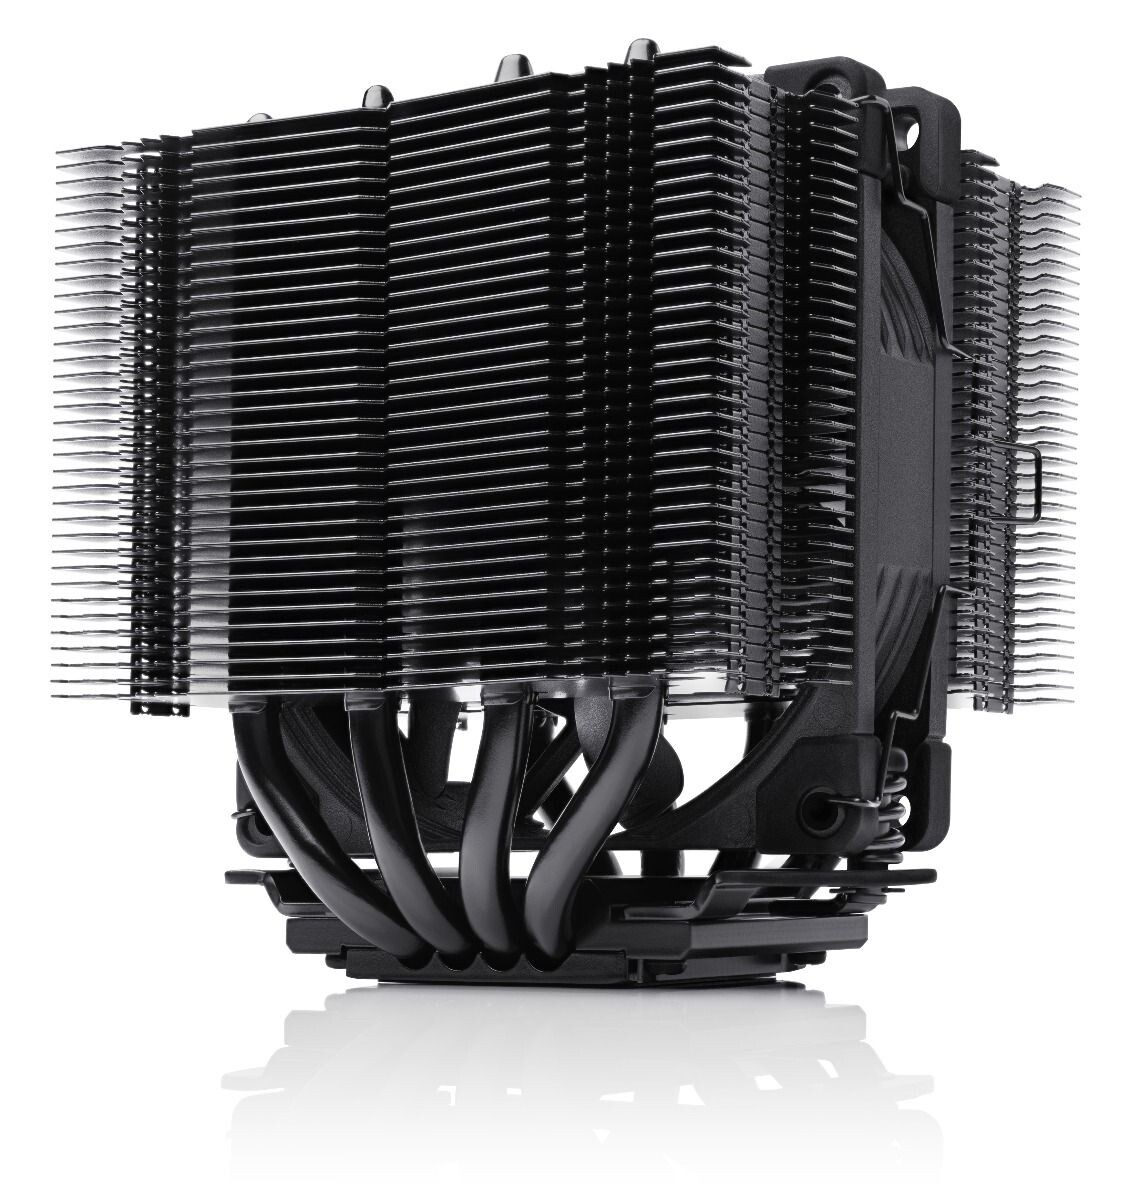 Noctua confirms AM5 heatsink compatibility and announces free-of-charge  upgrades for low-profile coolers and older heatsink models